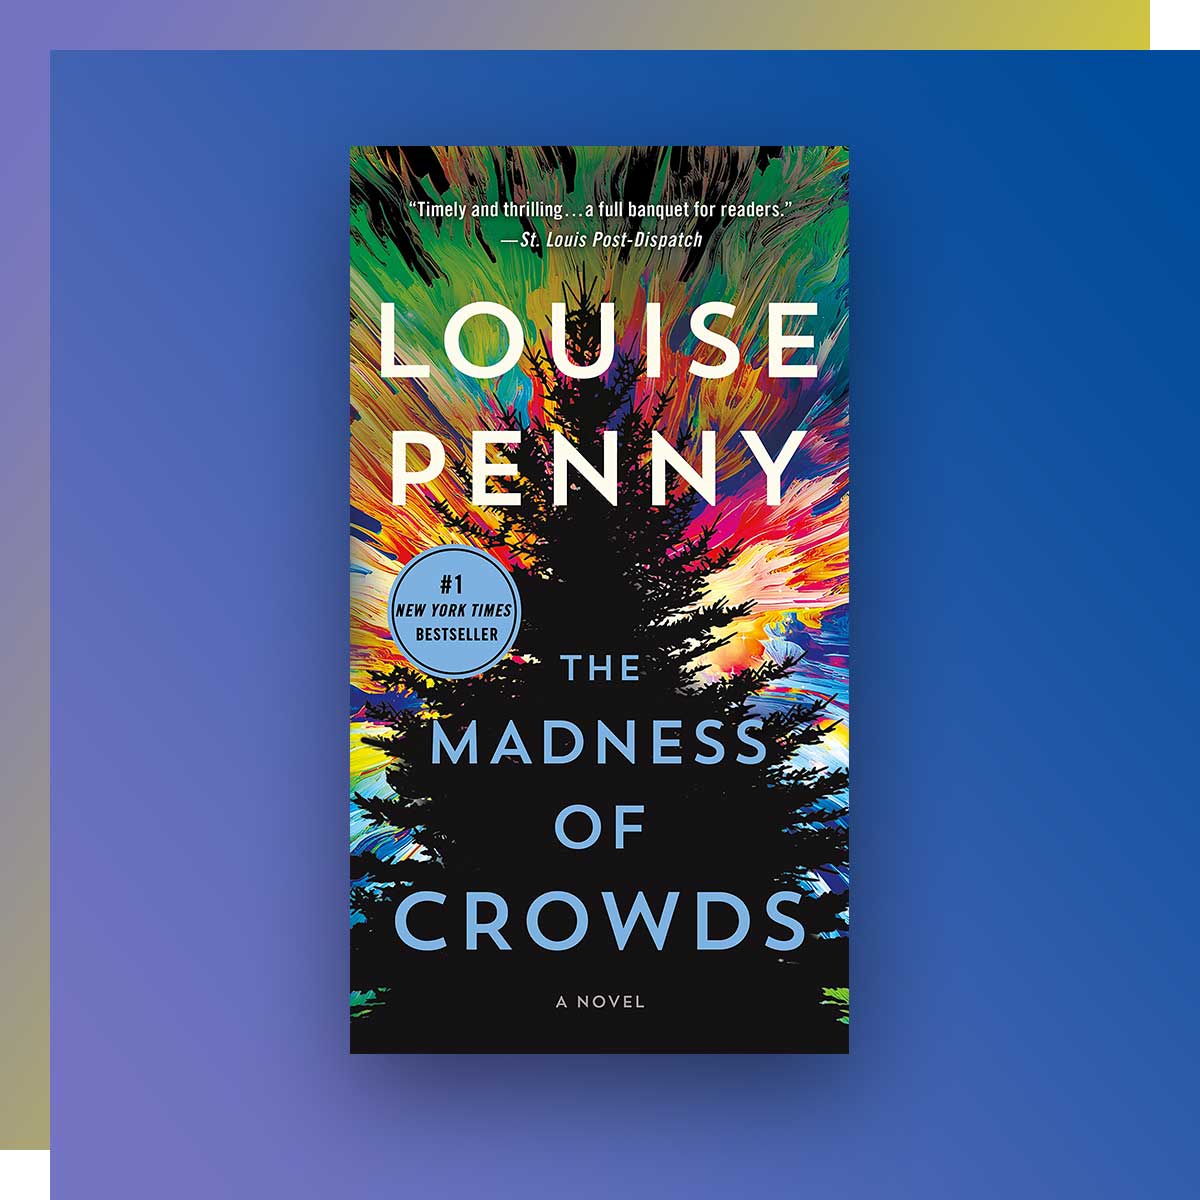 Madness of Crowds: A Novel; Author: Louise Penny, Radio and Television Arts ‘79